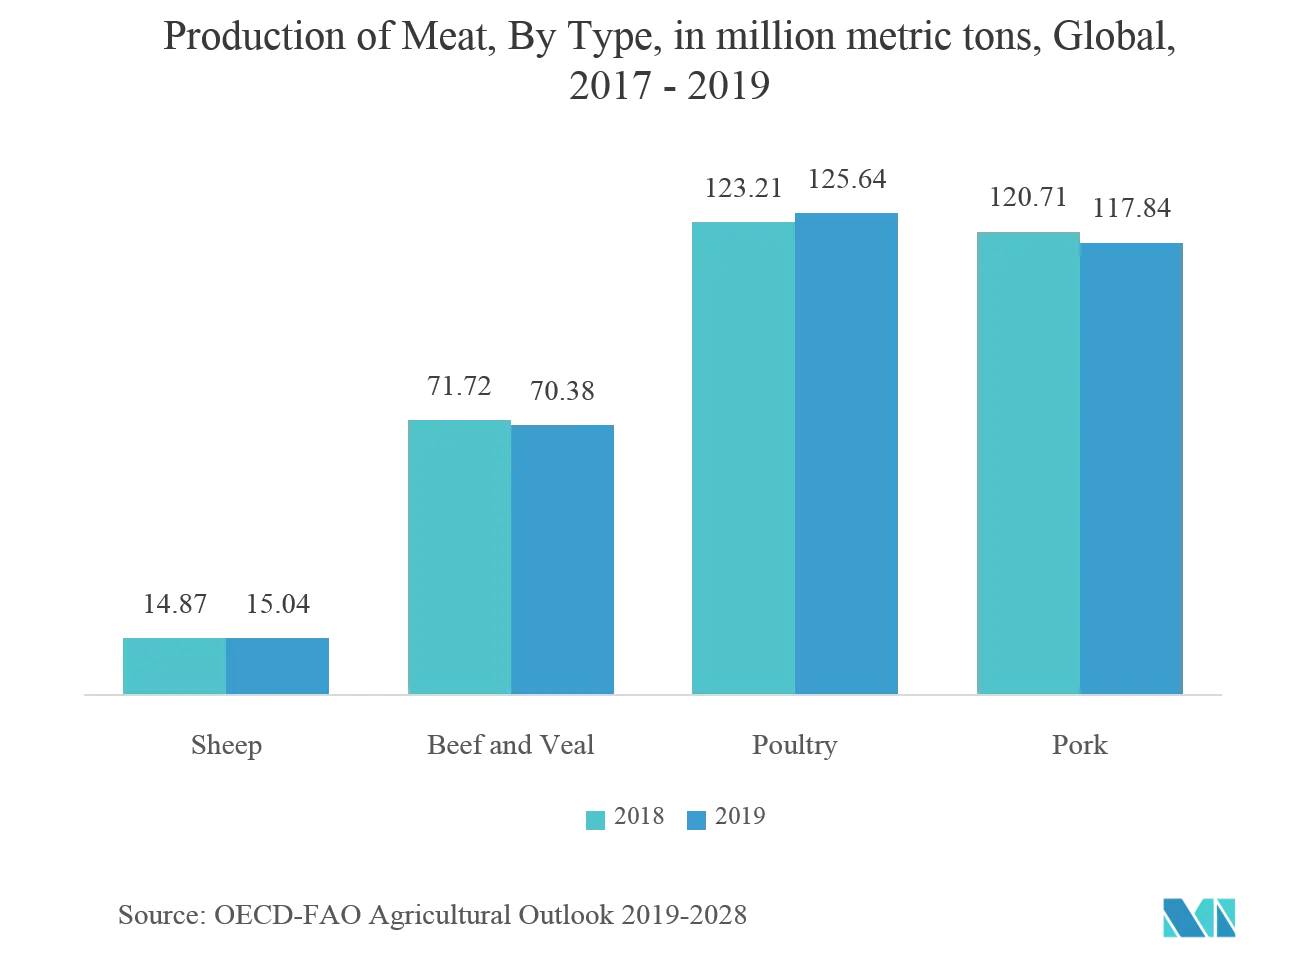 Skin Packaging Market: Production of Meat, By Type, in million metric tons, Global,2017-2019